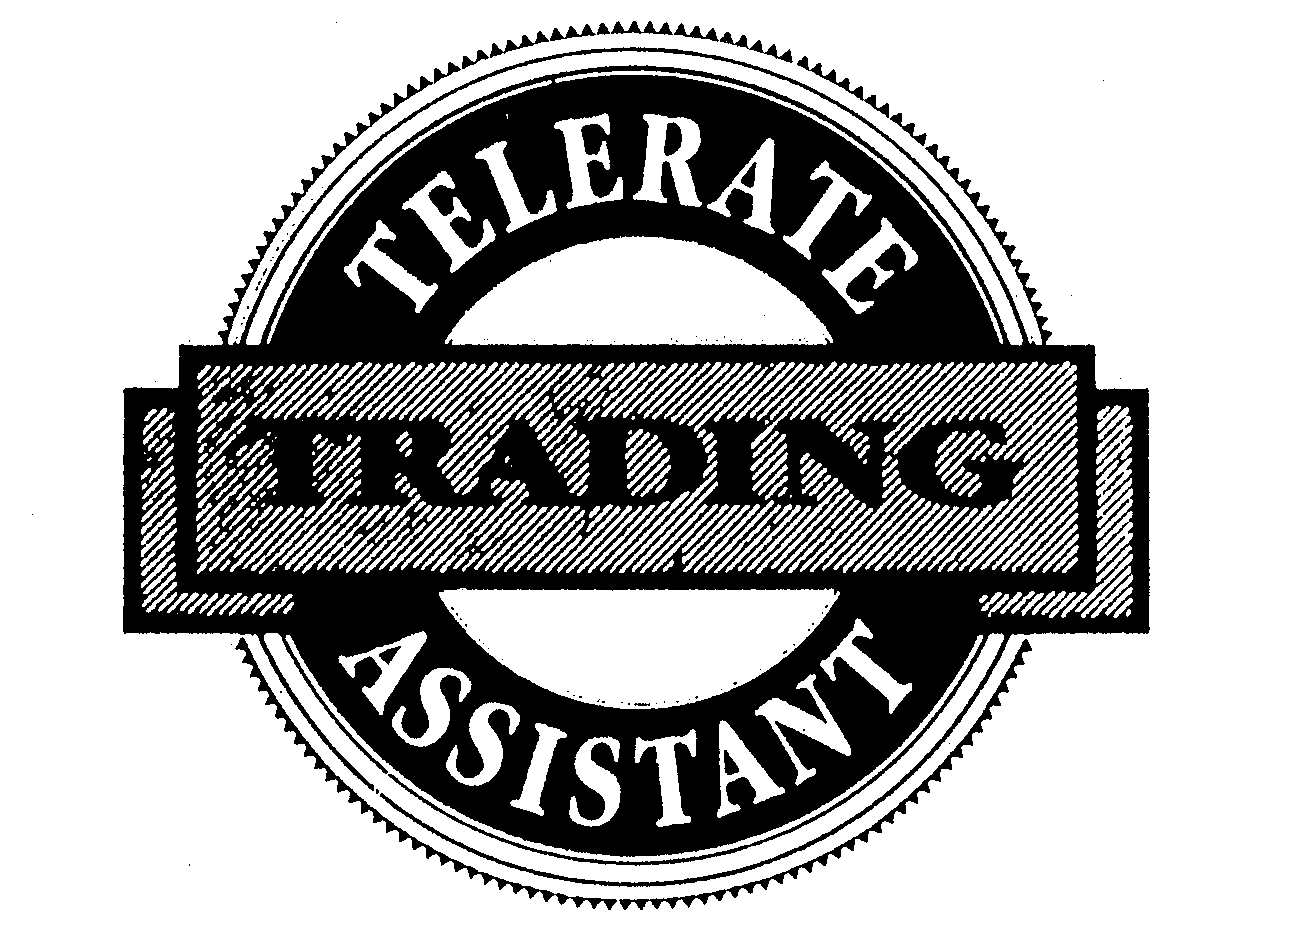  TELERATE TRADING ASSISTANT